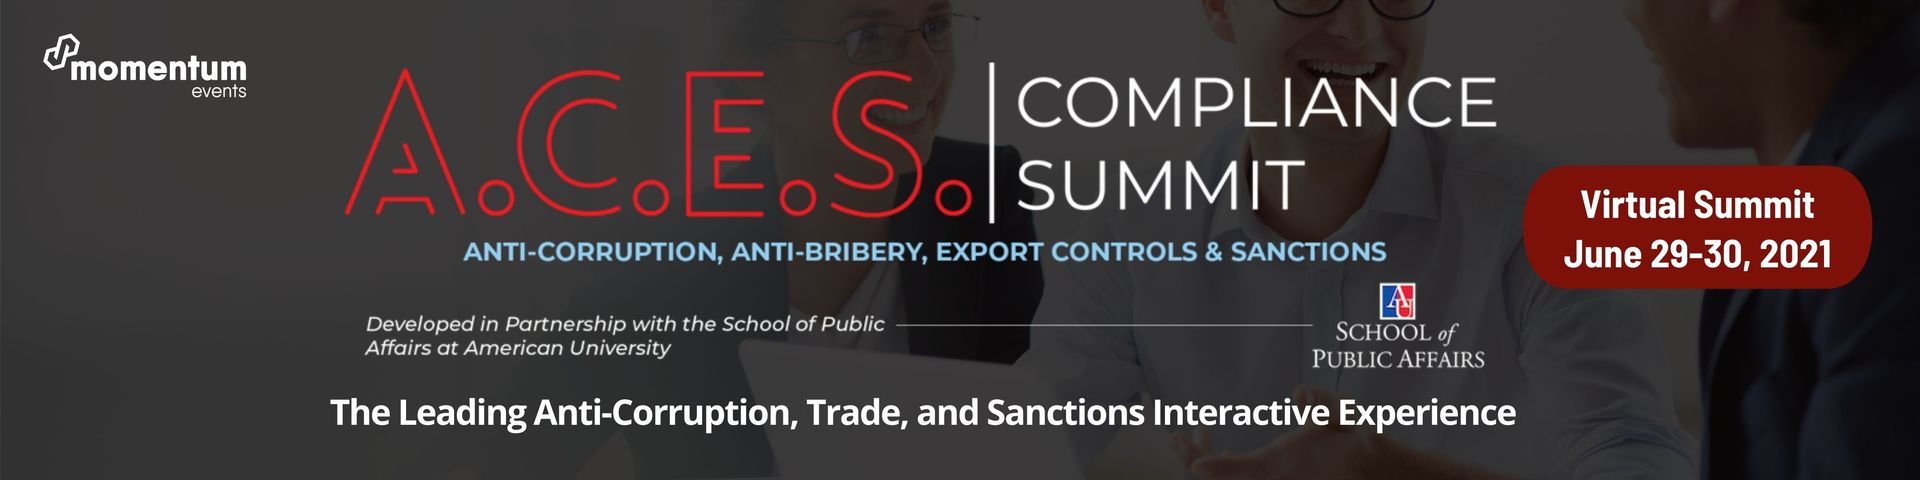 A.C.E.S Virtual - The 14th Anti-Corruption, Export Controls, and Sanctions Compliance Summit, Online, United States